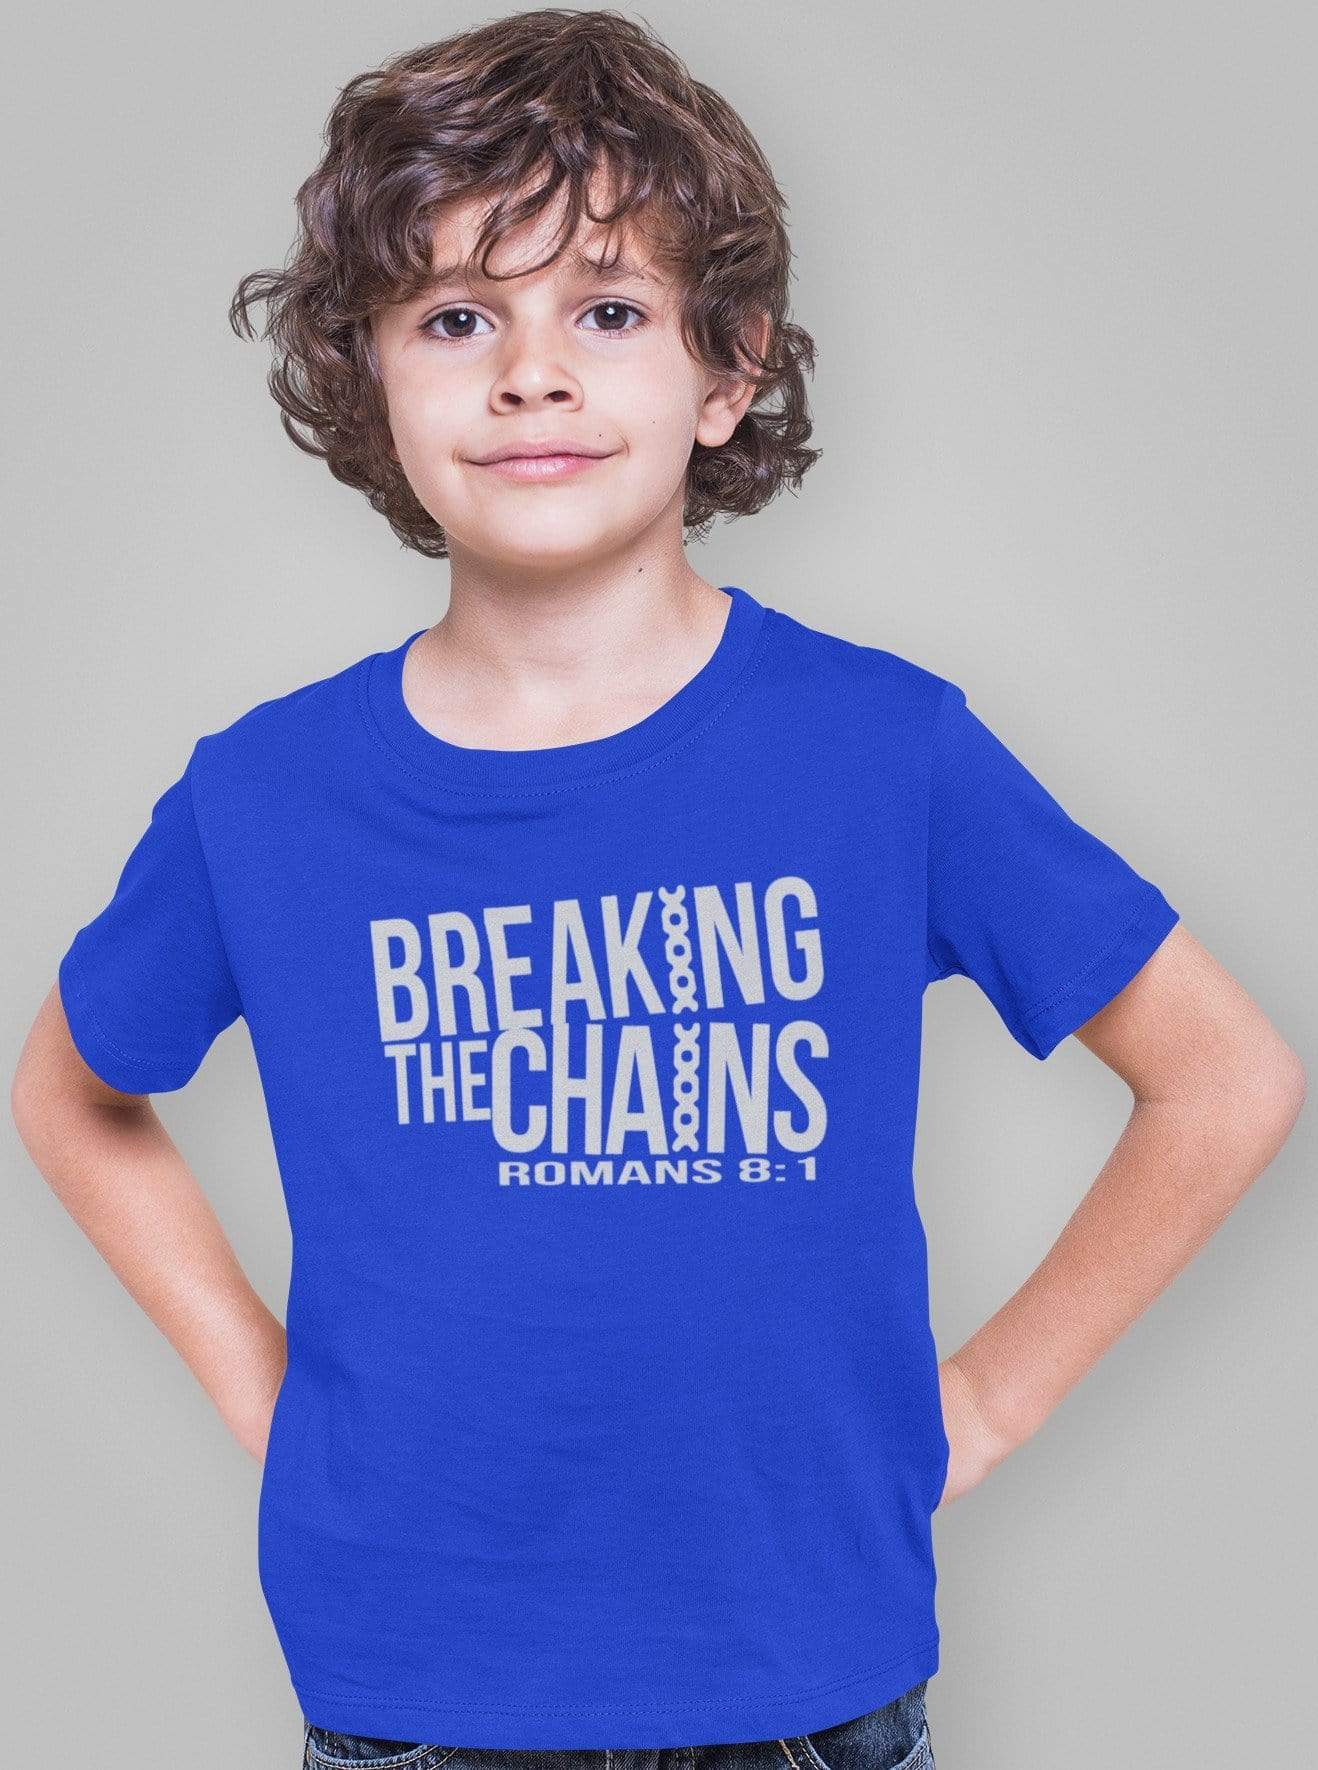 Living Words Kids Round Neck T Shirt Boy / 0-12 Mn / Royal Blue Breaking the chains